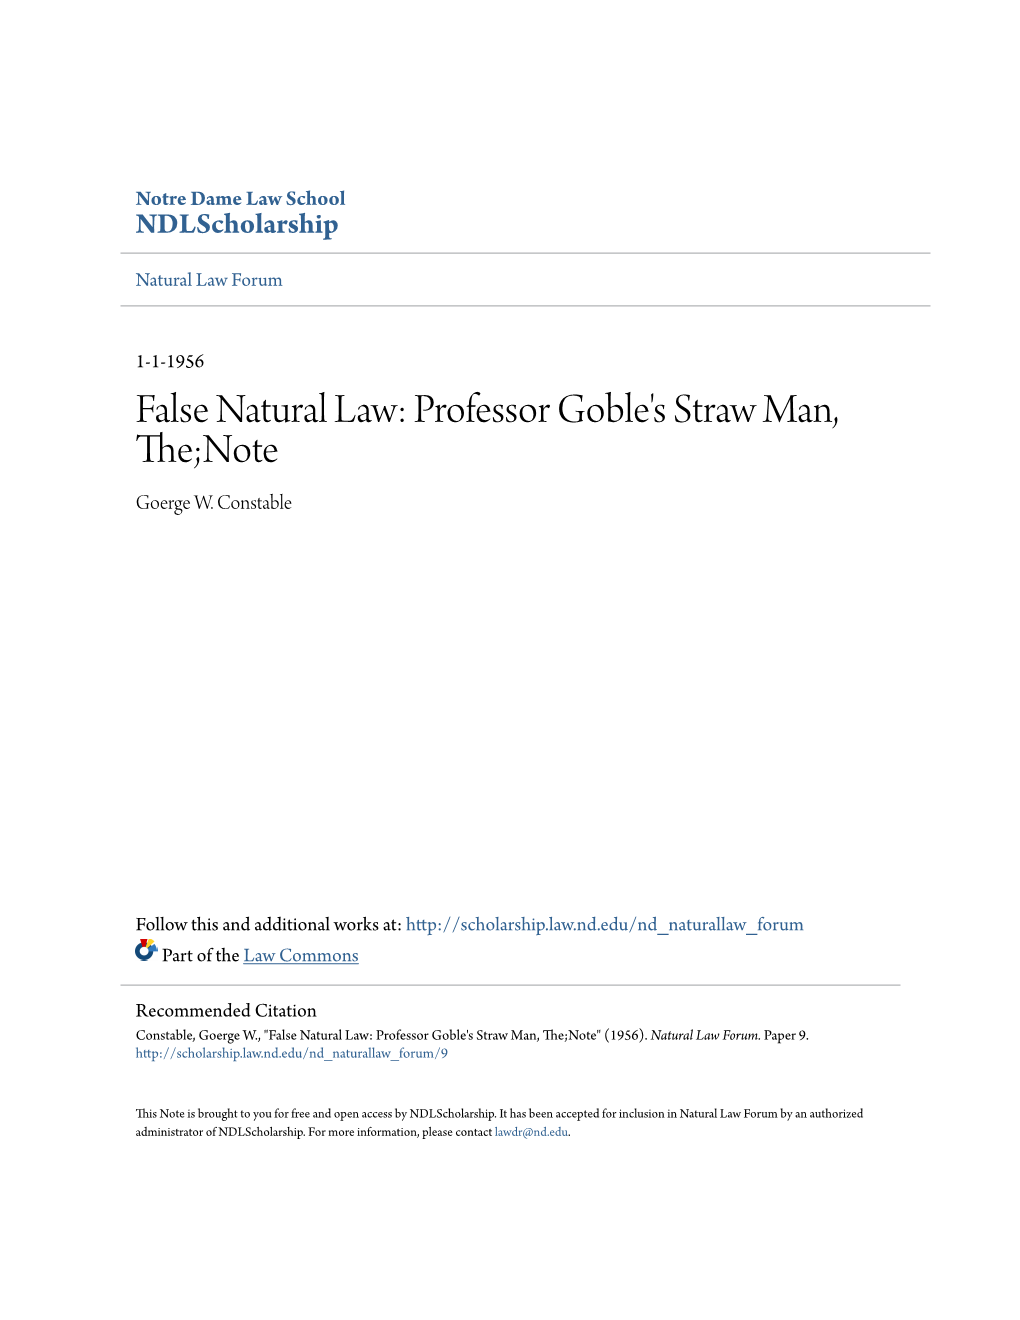 False Natural Law: Professor Goble's Straw Man, The;Note Goerge W